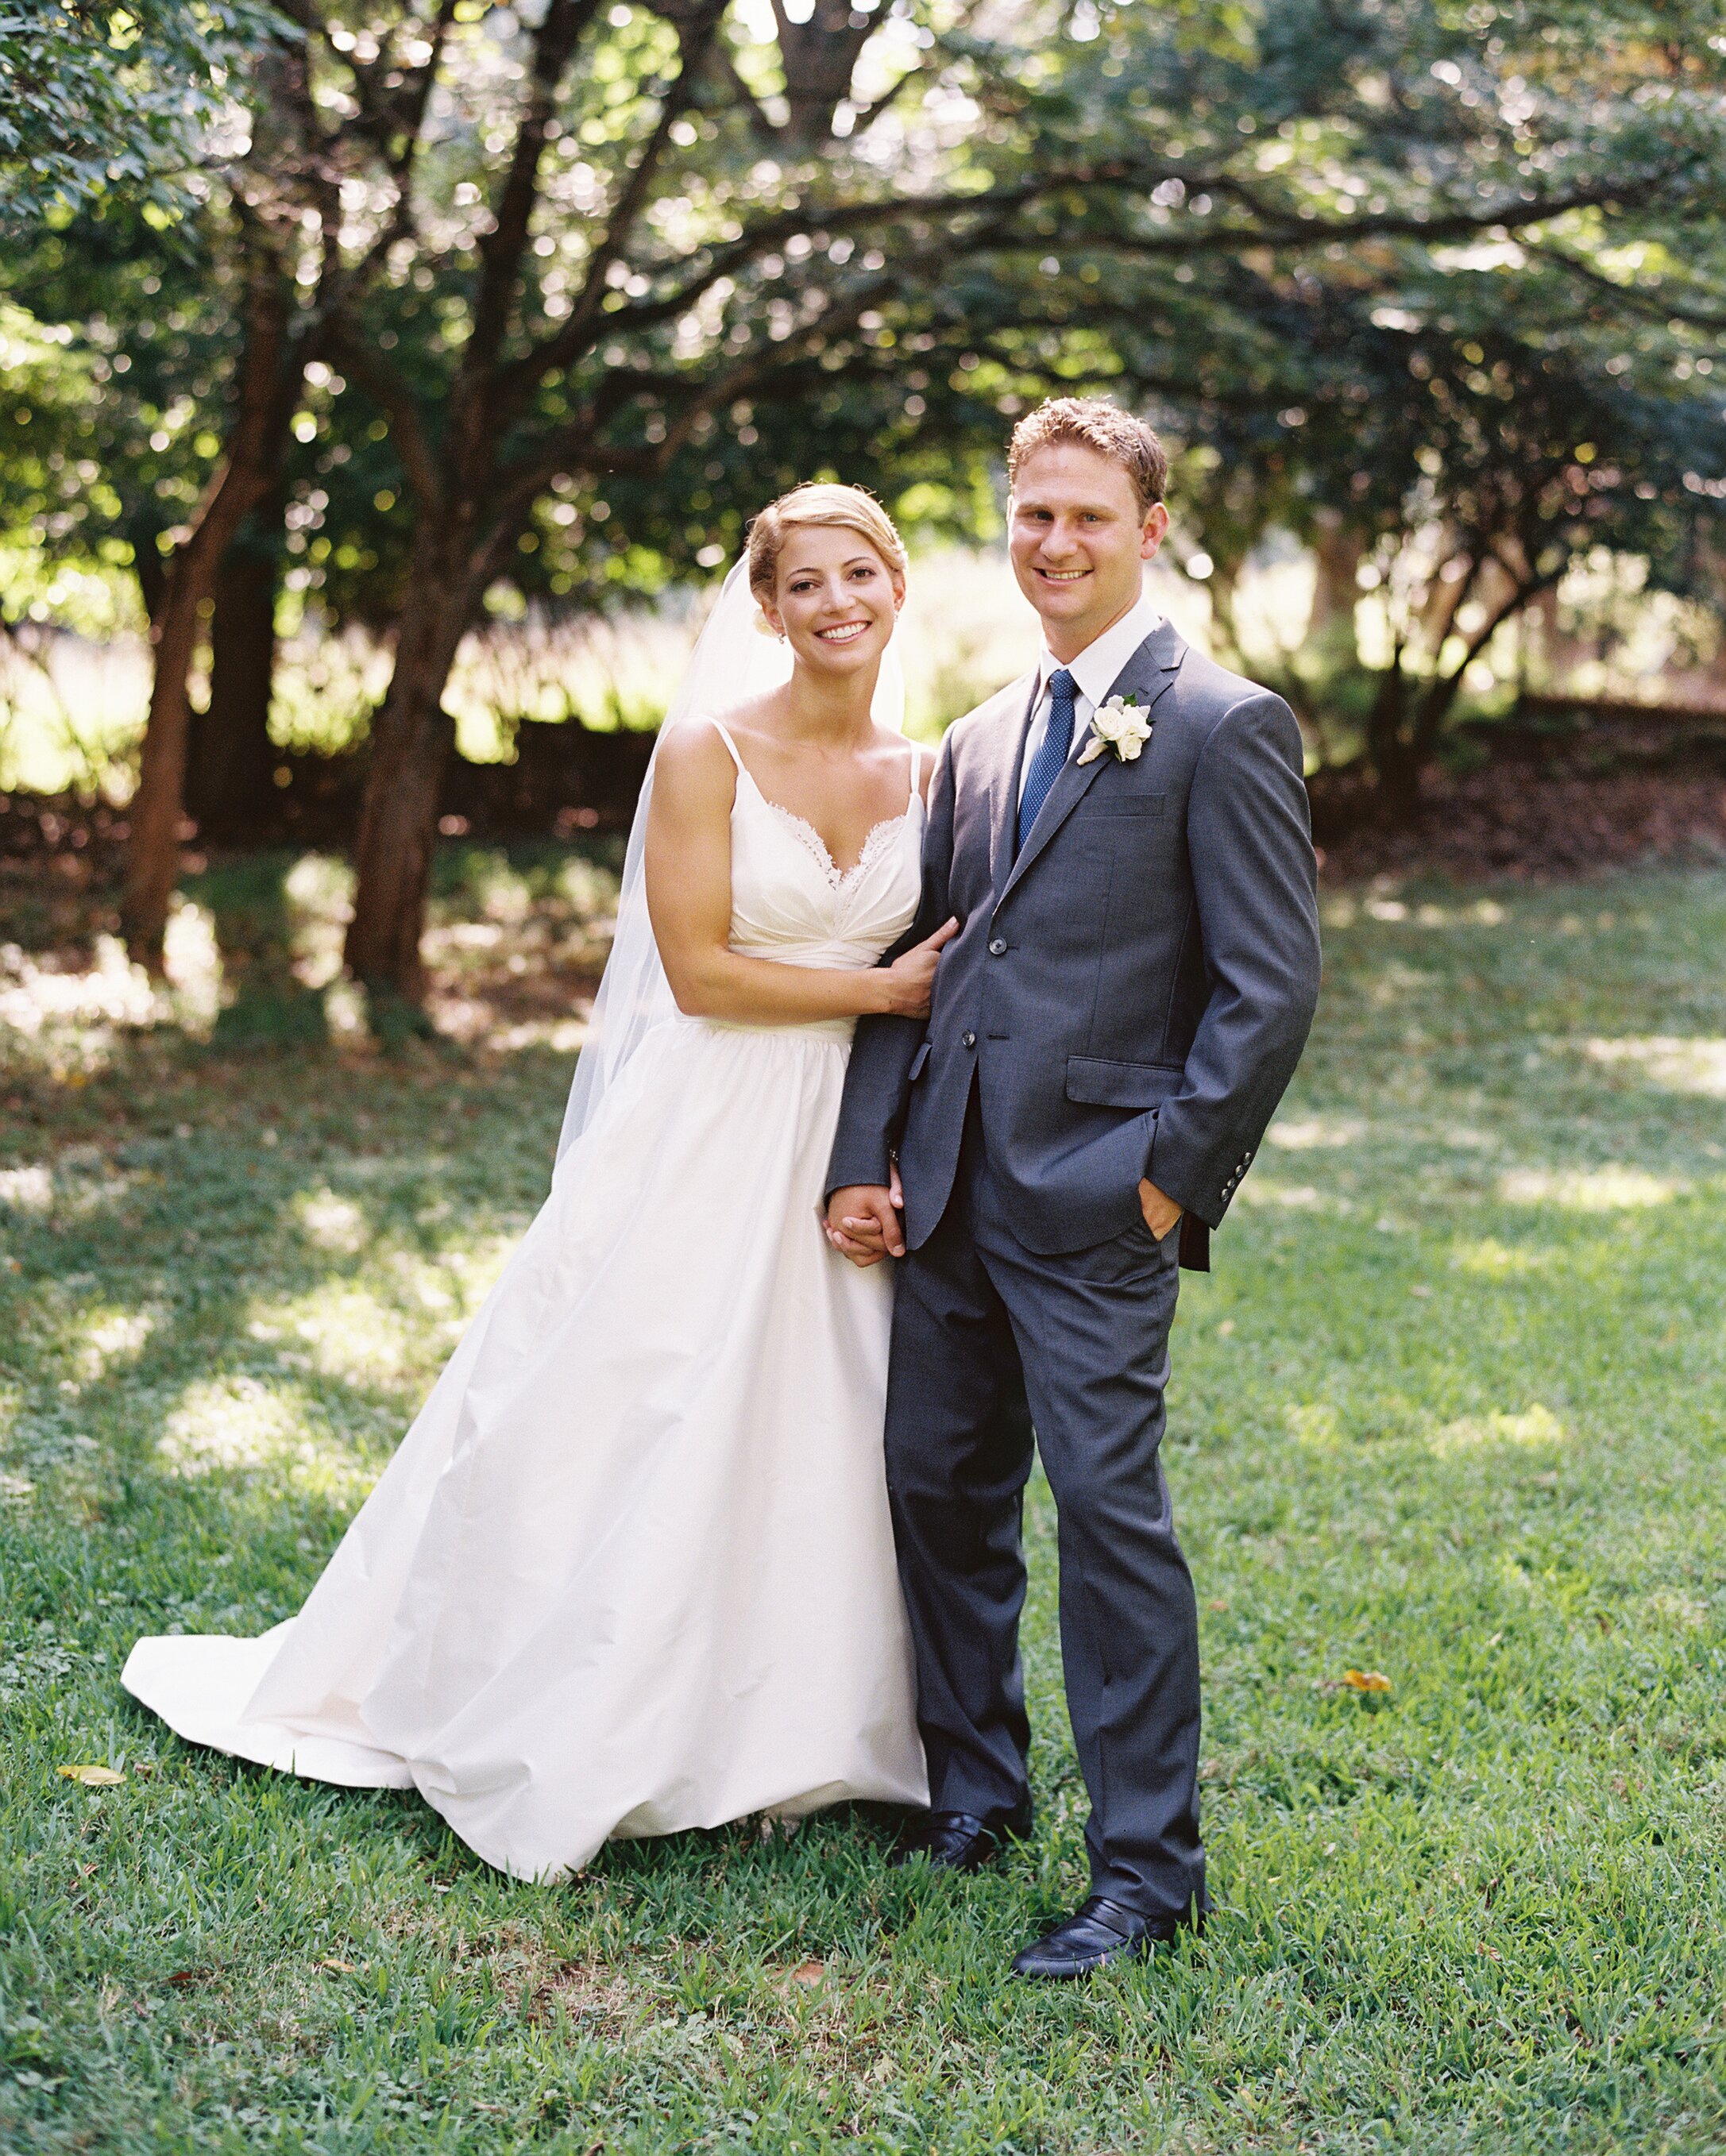 Beth And Scott S Sweet Summer Wedding At A Maryland Nature